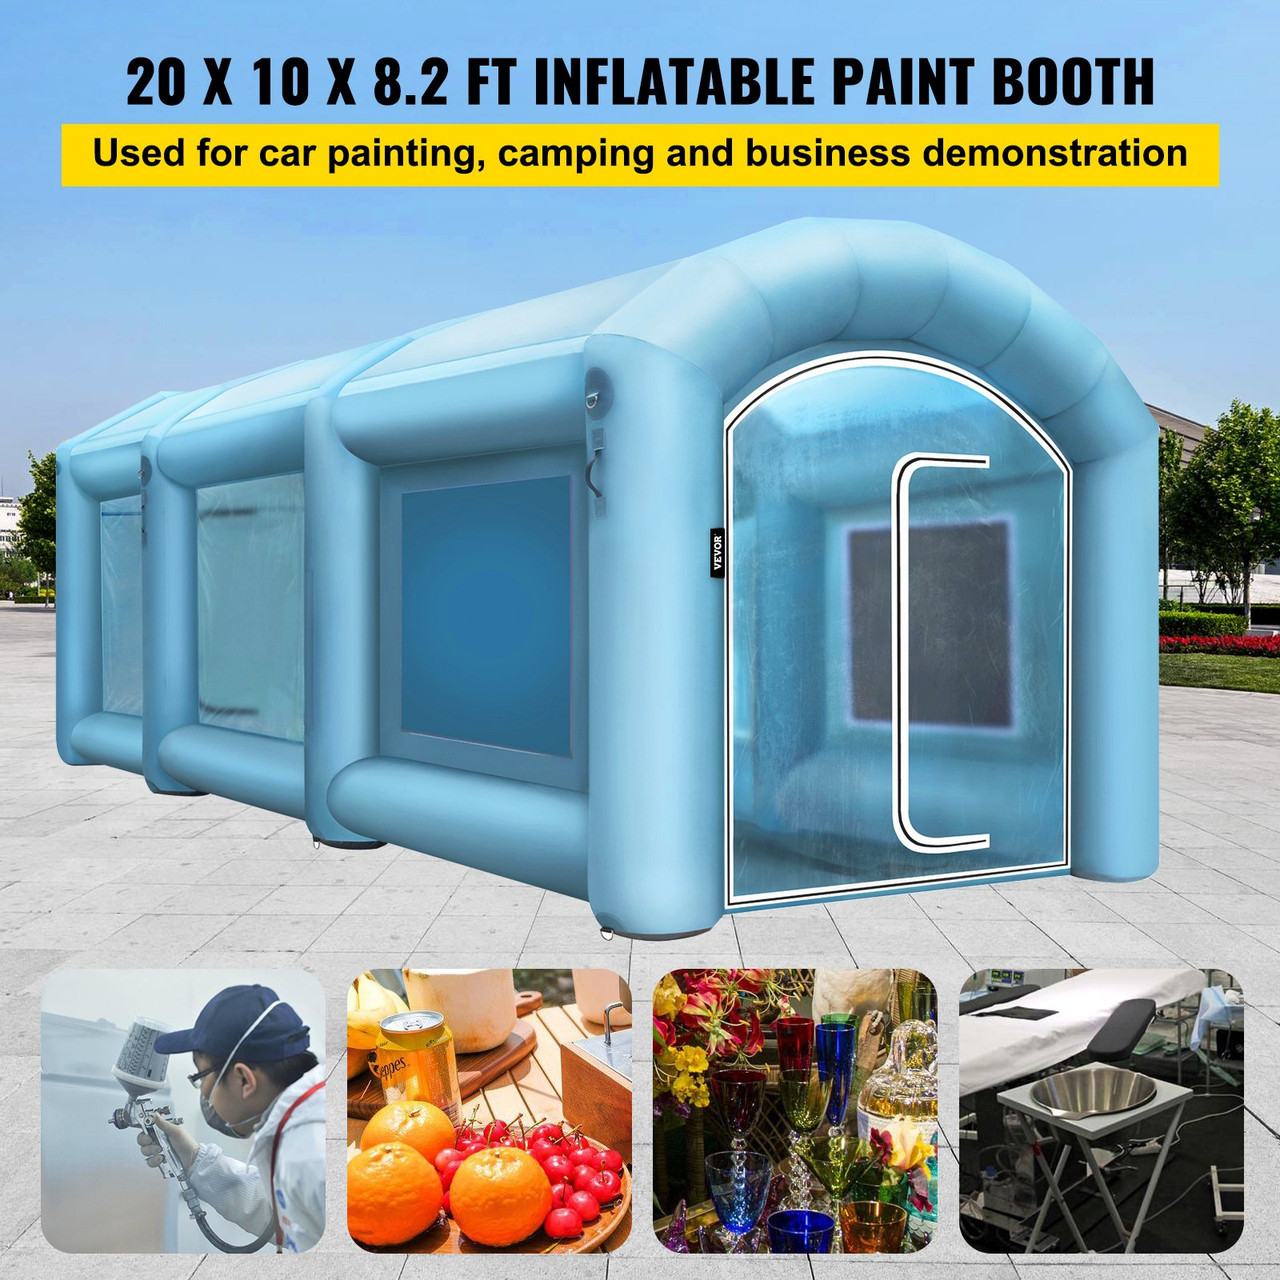 Inflatable Spray Booth Car Paint Tent 20 x 10 x 8 ft w/Filter & 2 Blowers